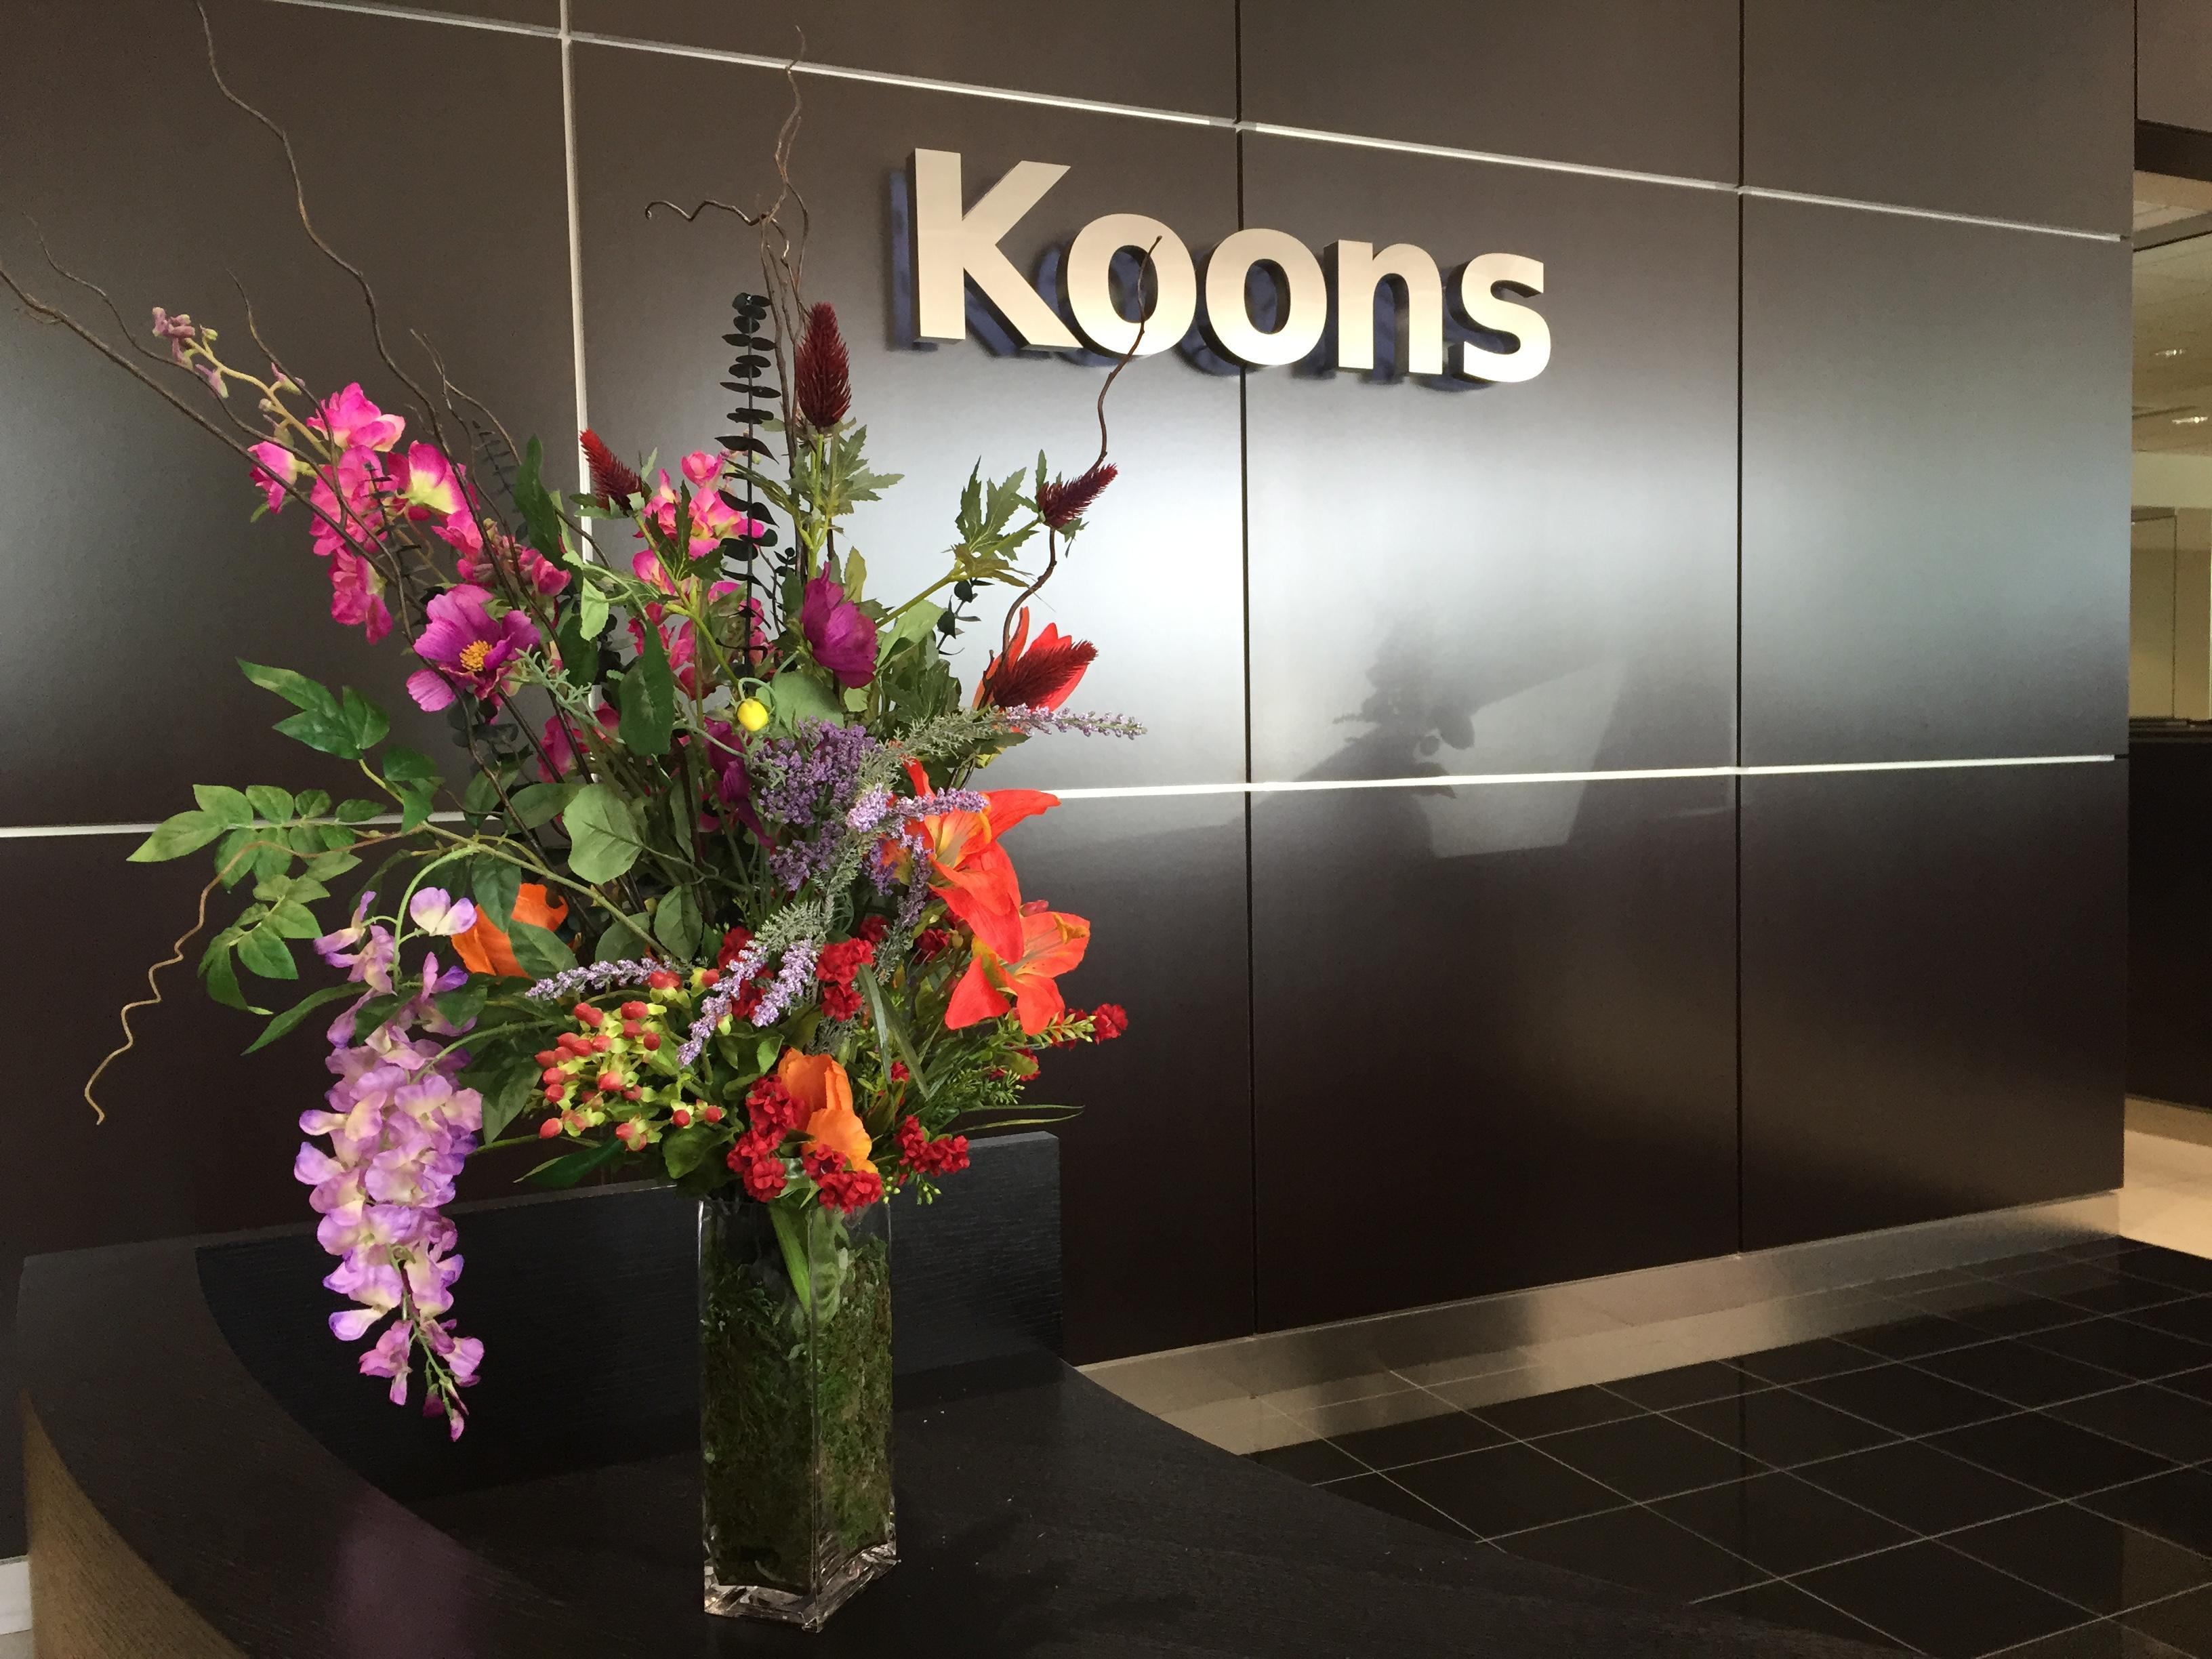 Koons Ford of Annapolis Photo